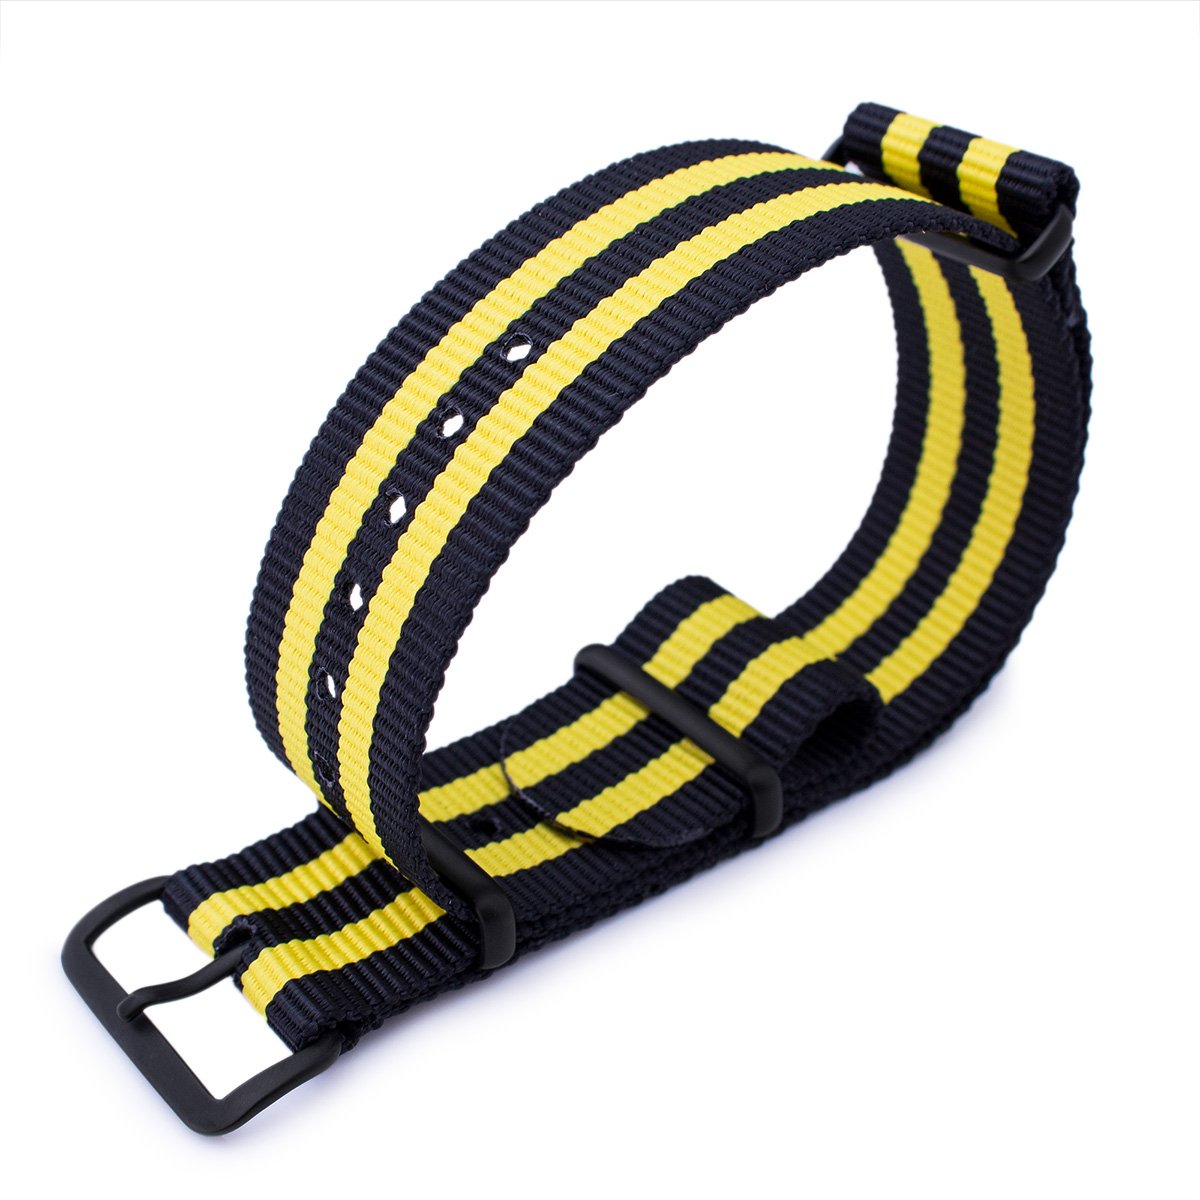 MiLTAT 20mm or 22mm G10 military watch strap ballistic nylon armband PVD Black Black &amp; Yellow Strapcode Watch Bands